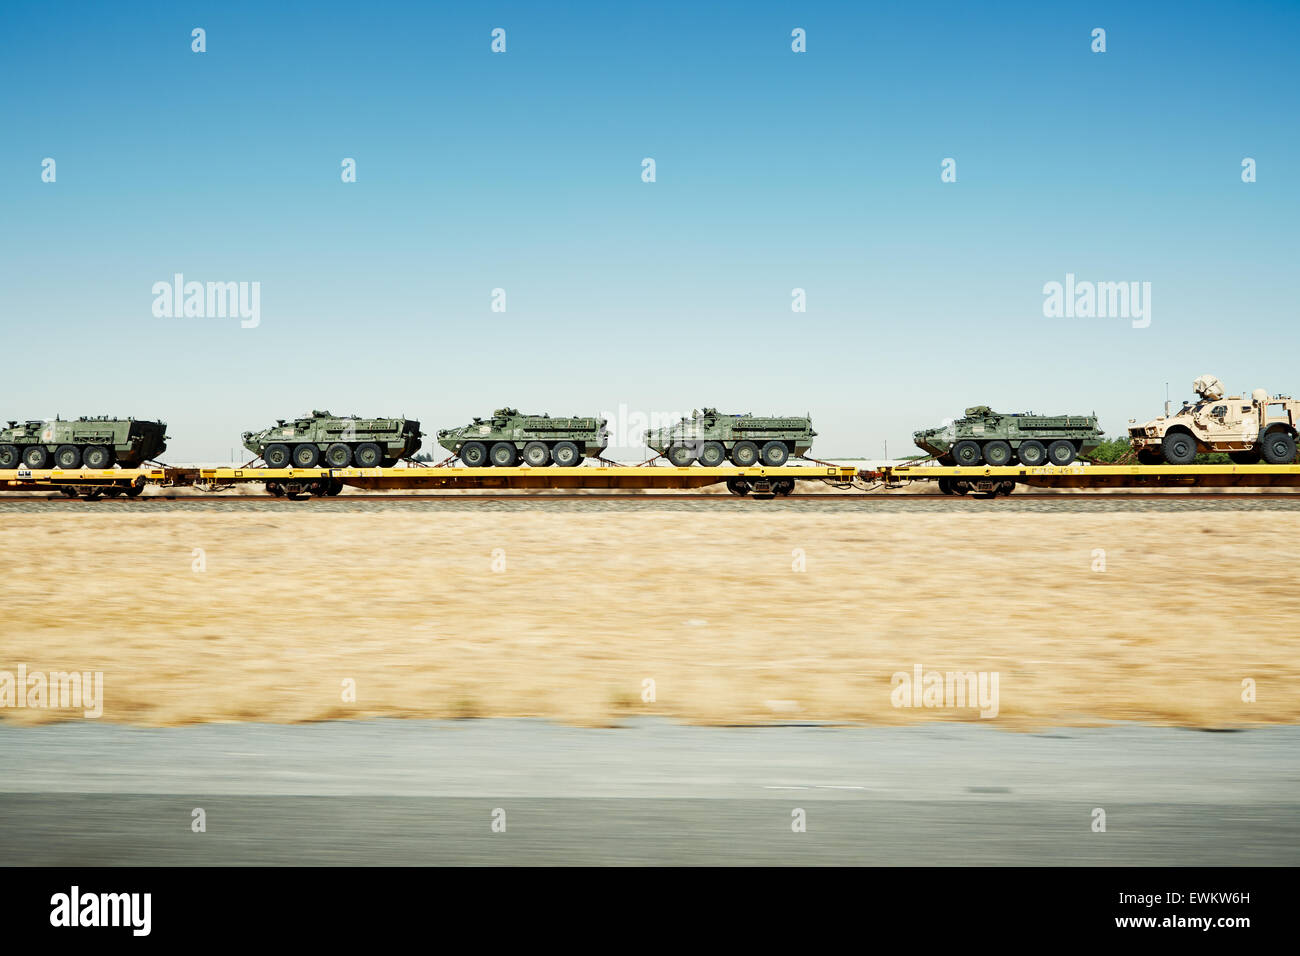 An endless cargo of tanks on a train pulled down tracks in an empty dry landscape. Stock Photo